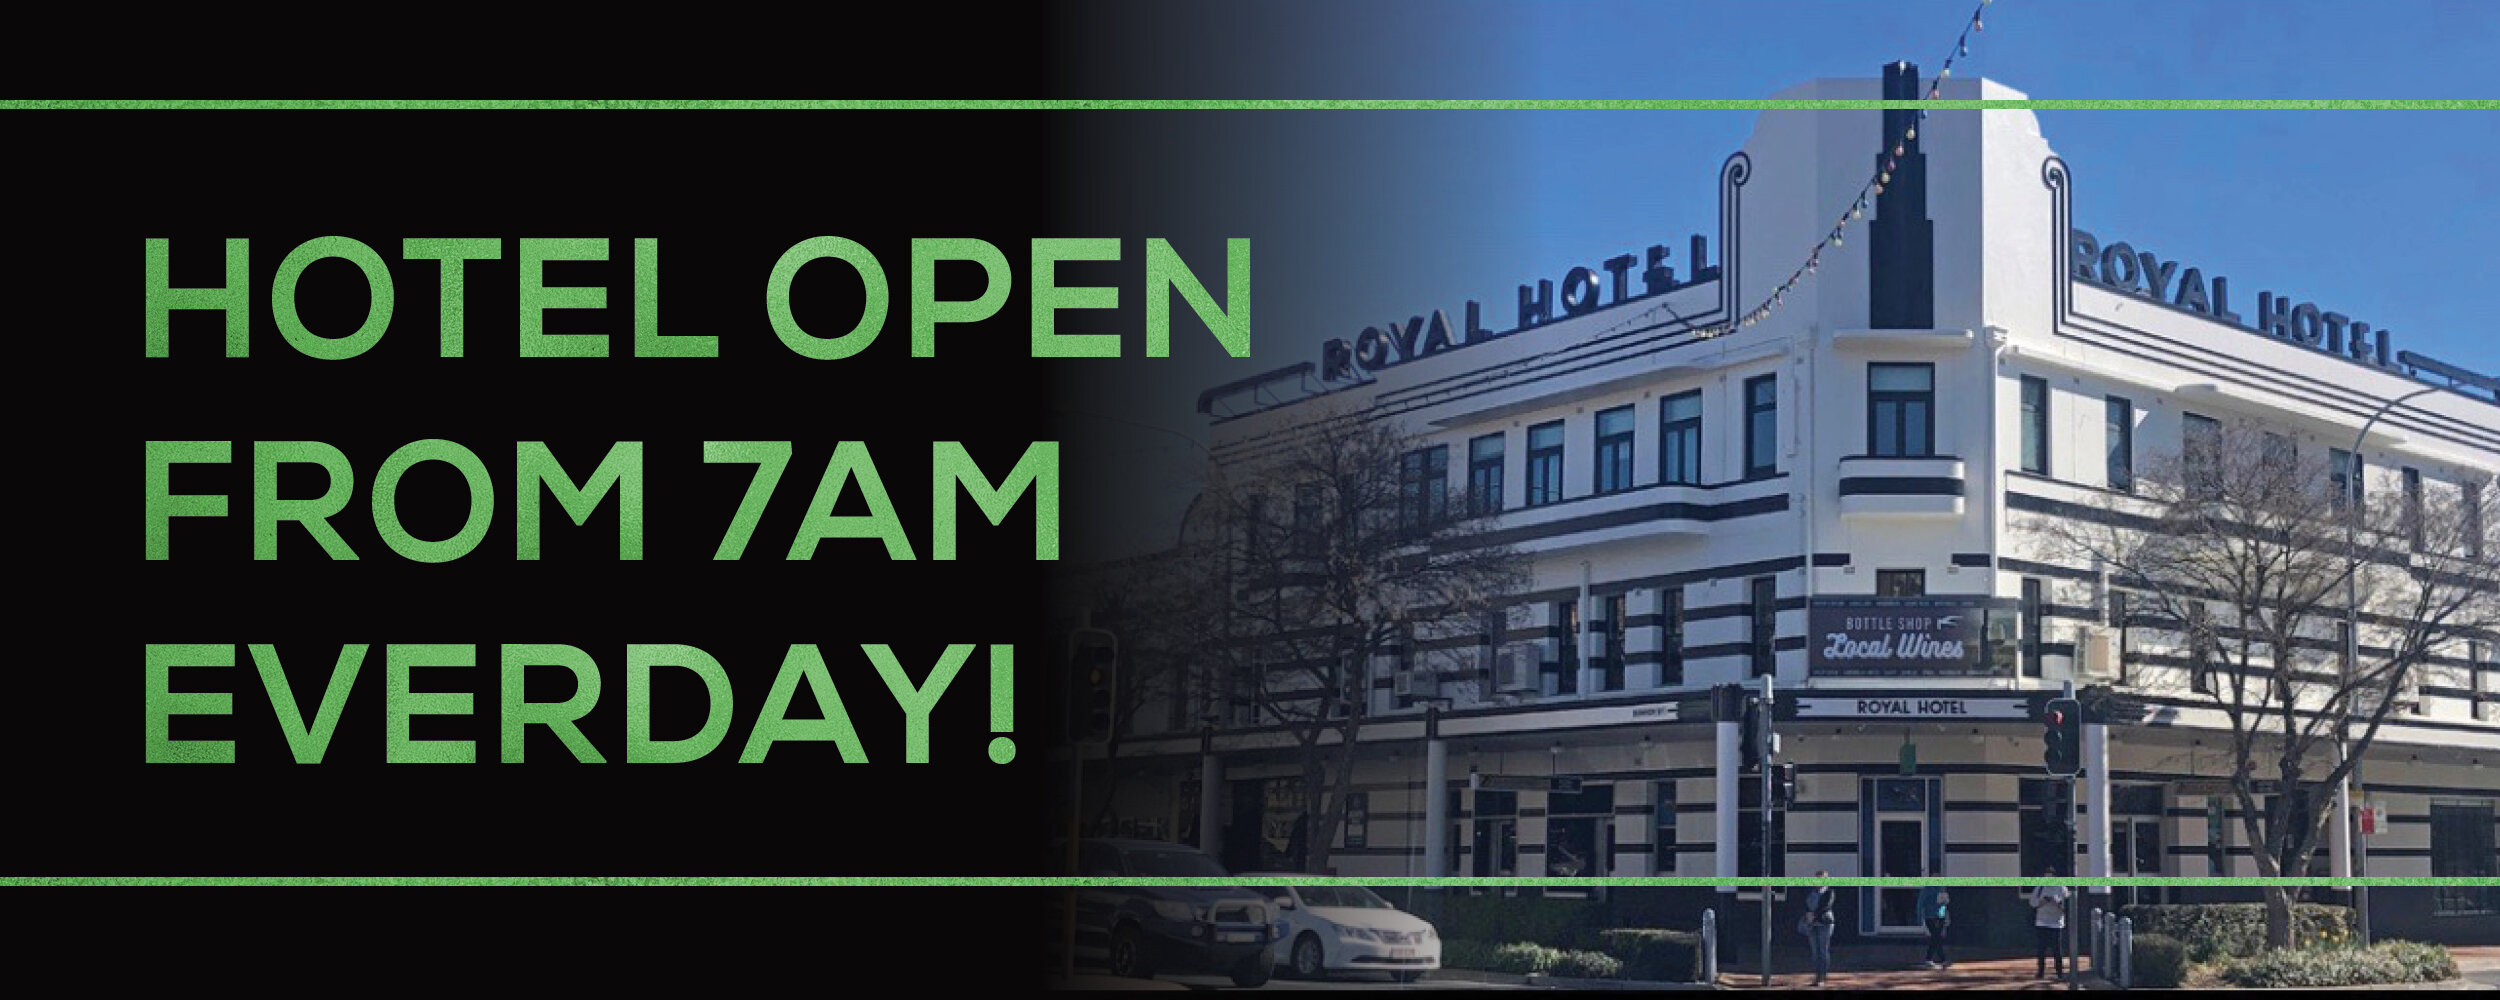 the-royal-hotel-orange-open-from-7am-everyday.jpg